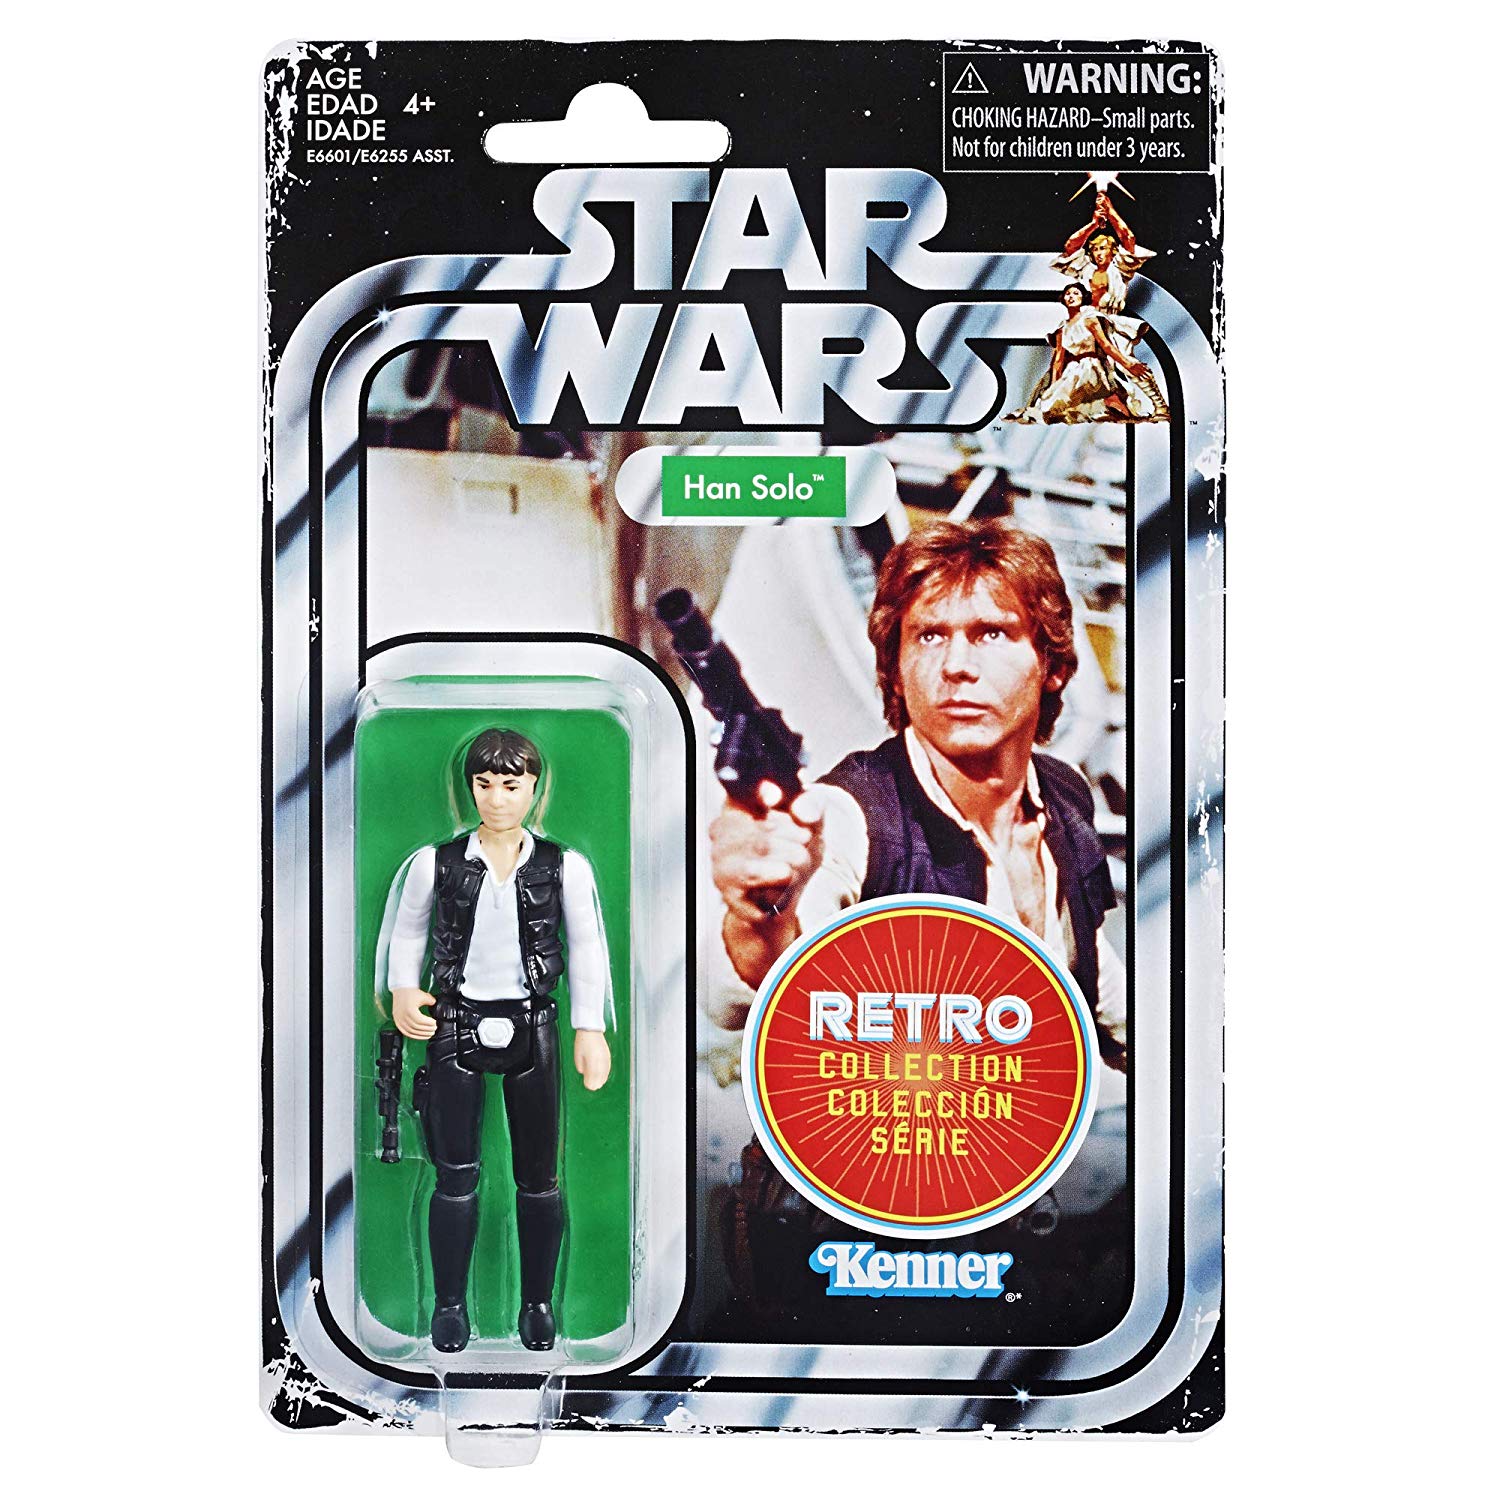 Star Wars The Retro Collection Han Solo Action Figure